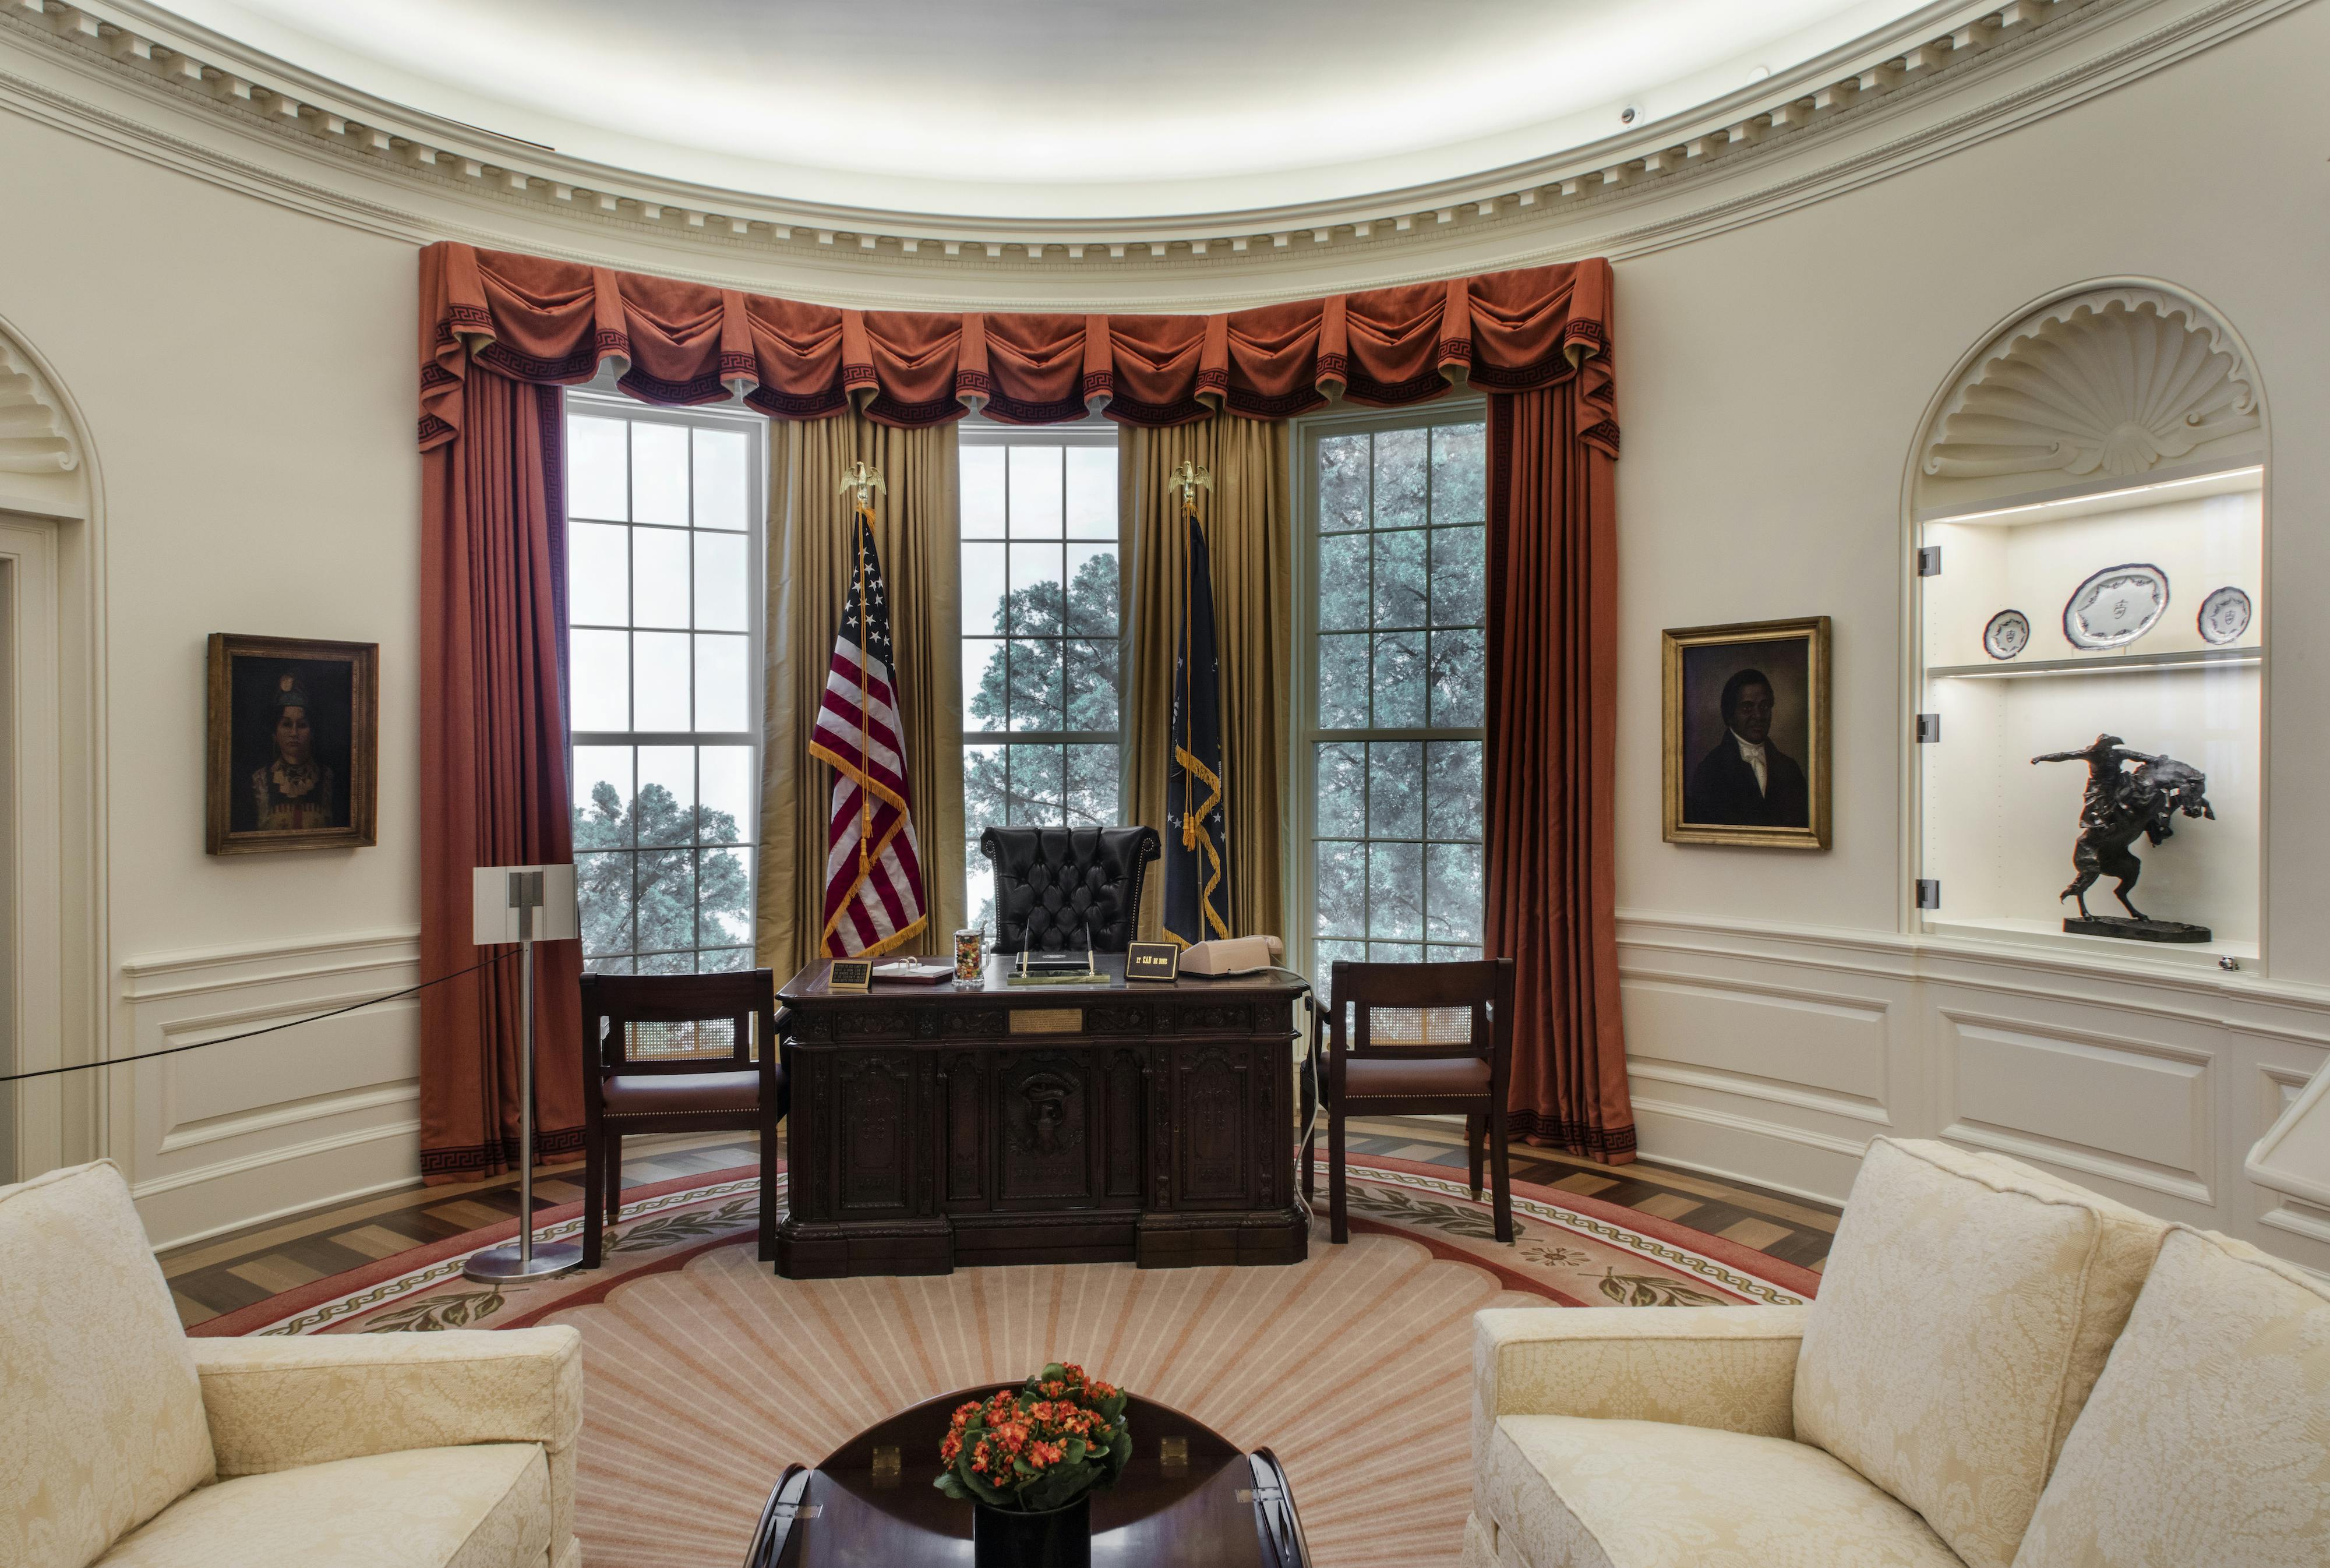 oval office coloring page